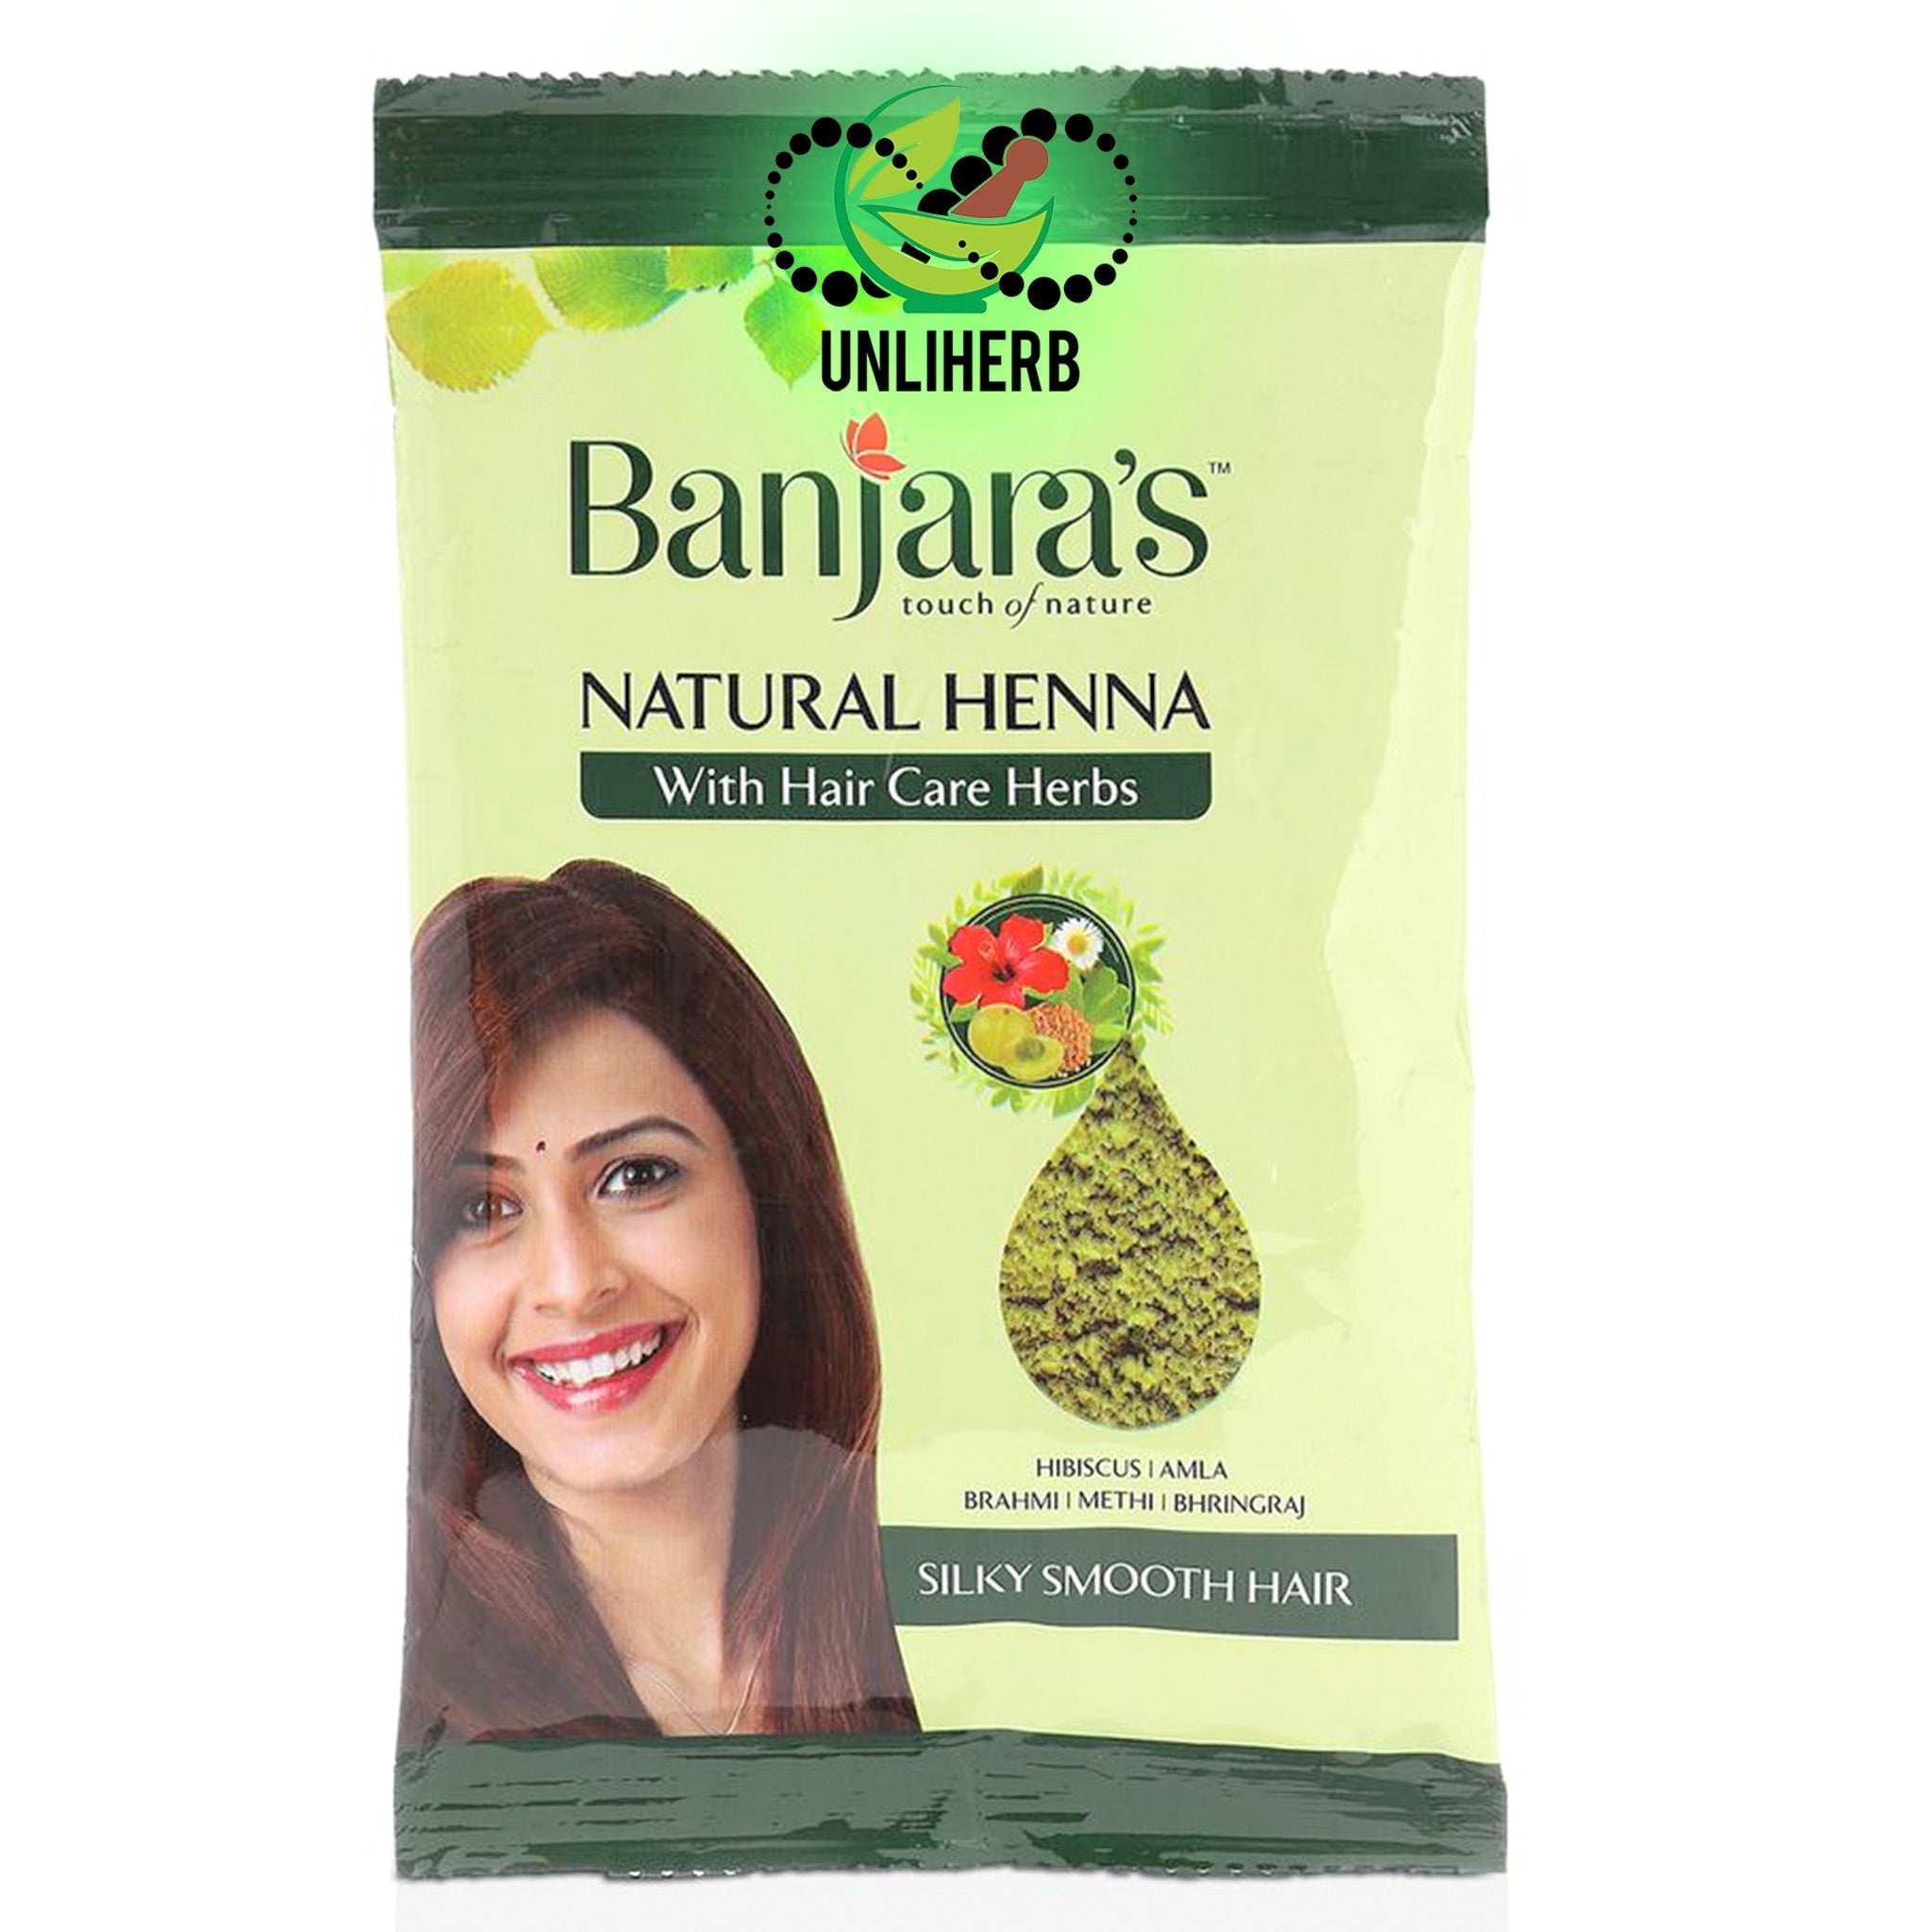 Banjaras Natural Henna with Hair Care Herbs pouch 100g